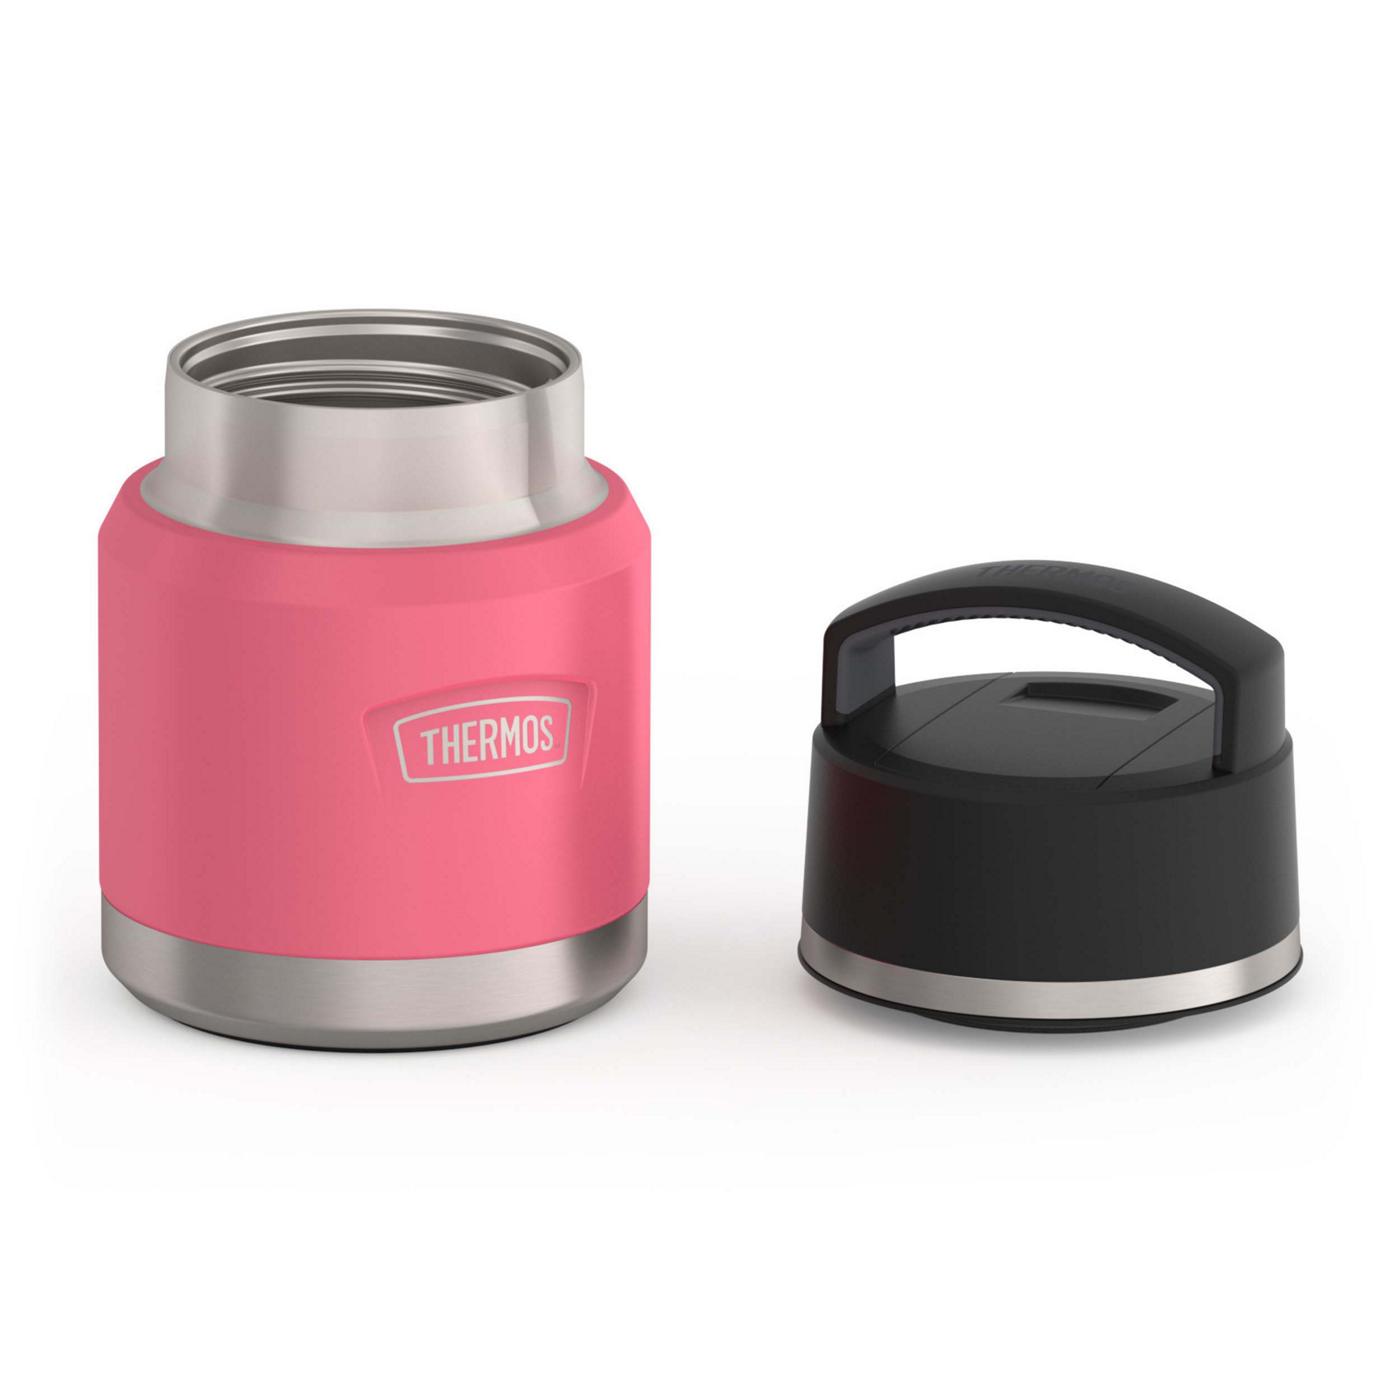 Thermos Icon Series Food Jar - Pink; image 3 of 6